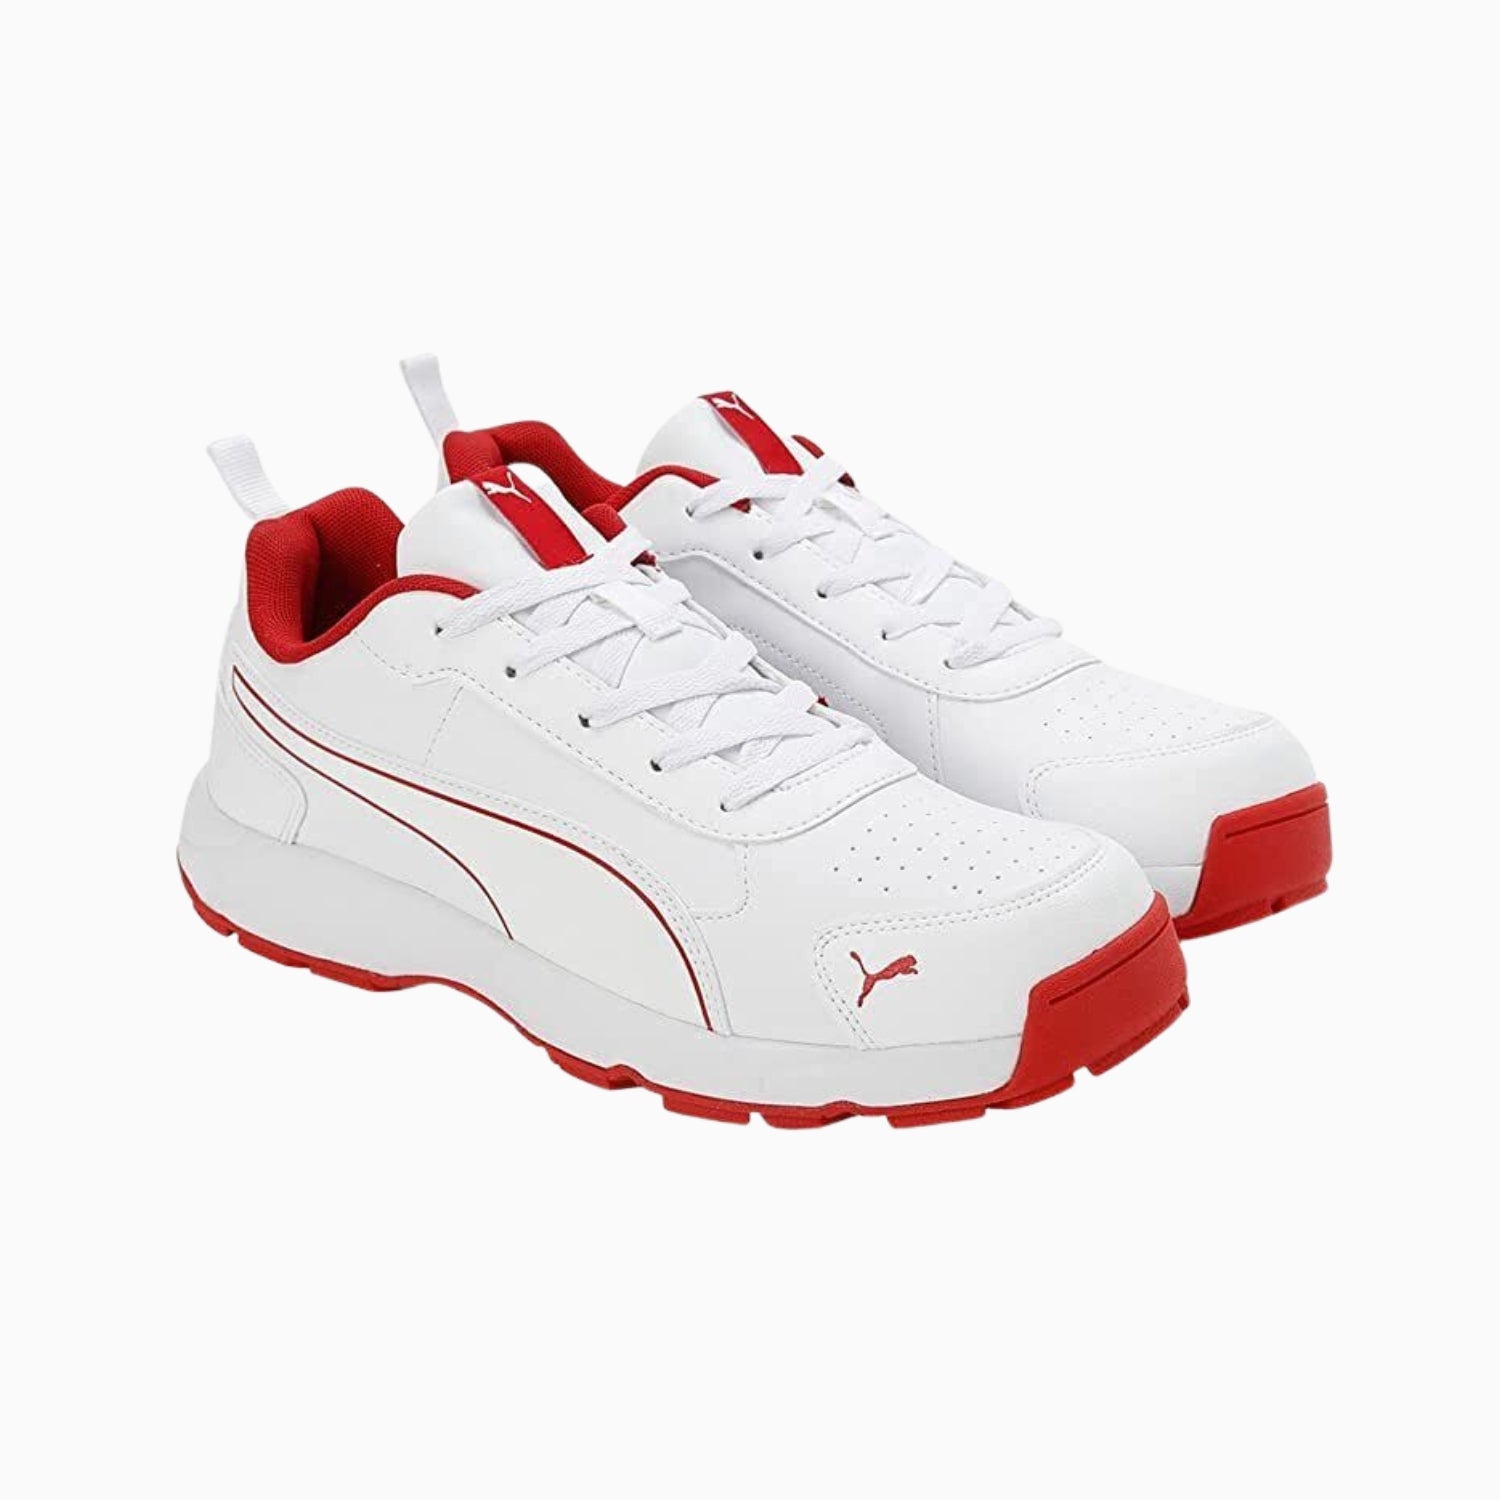 Puma Cricket Shoes, Model Classic Cat, White/Red